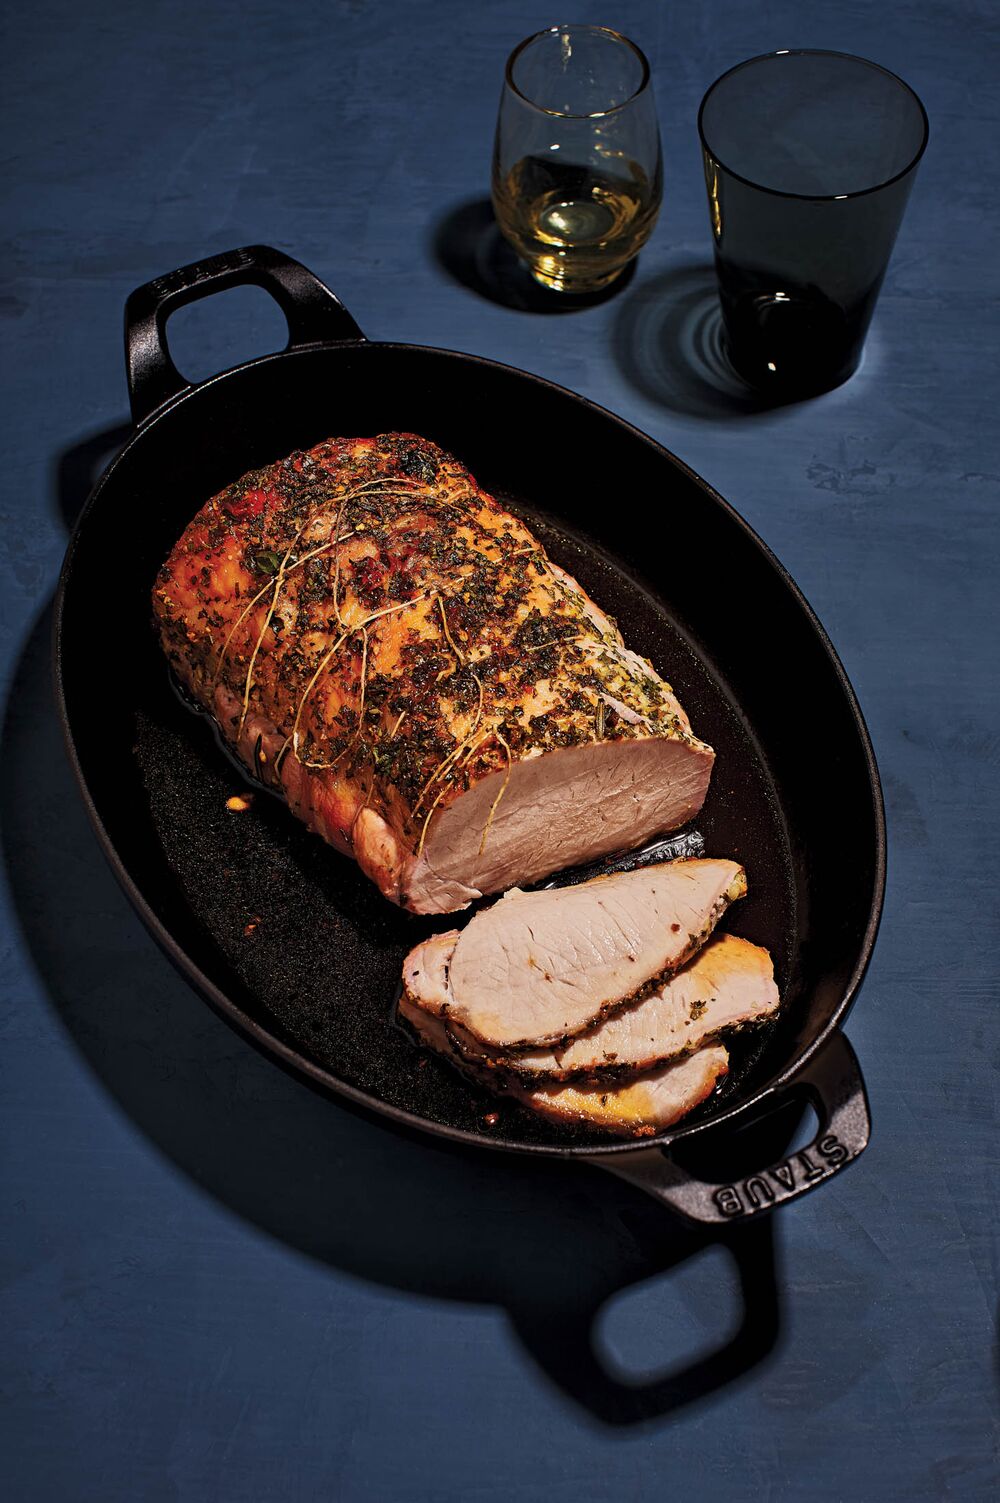 Pork Roast To Lime Cookies A Top Chef Leftovers Recipe Chain Bloomberg